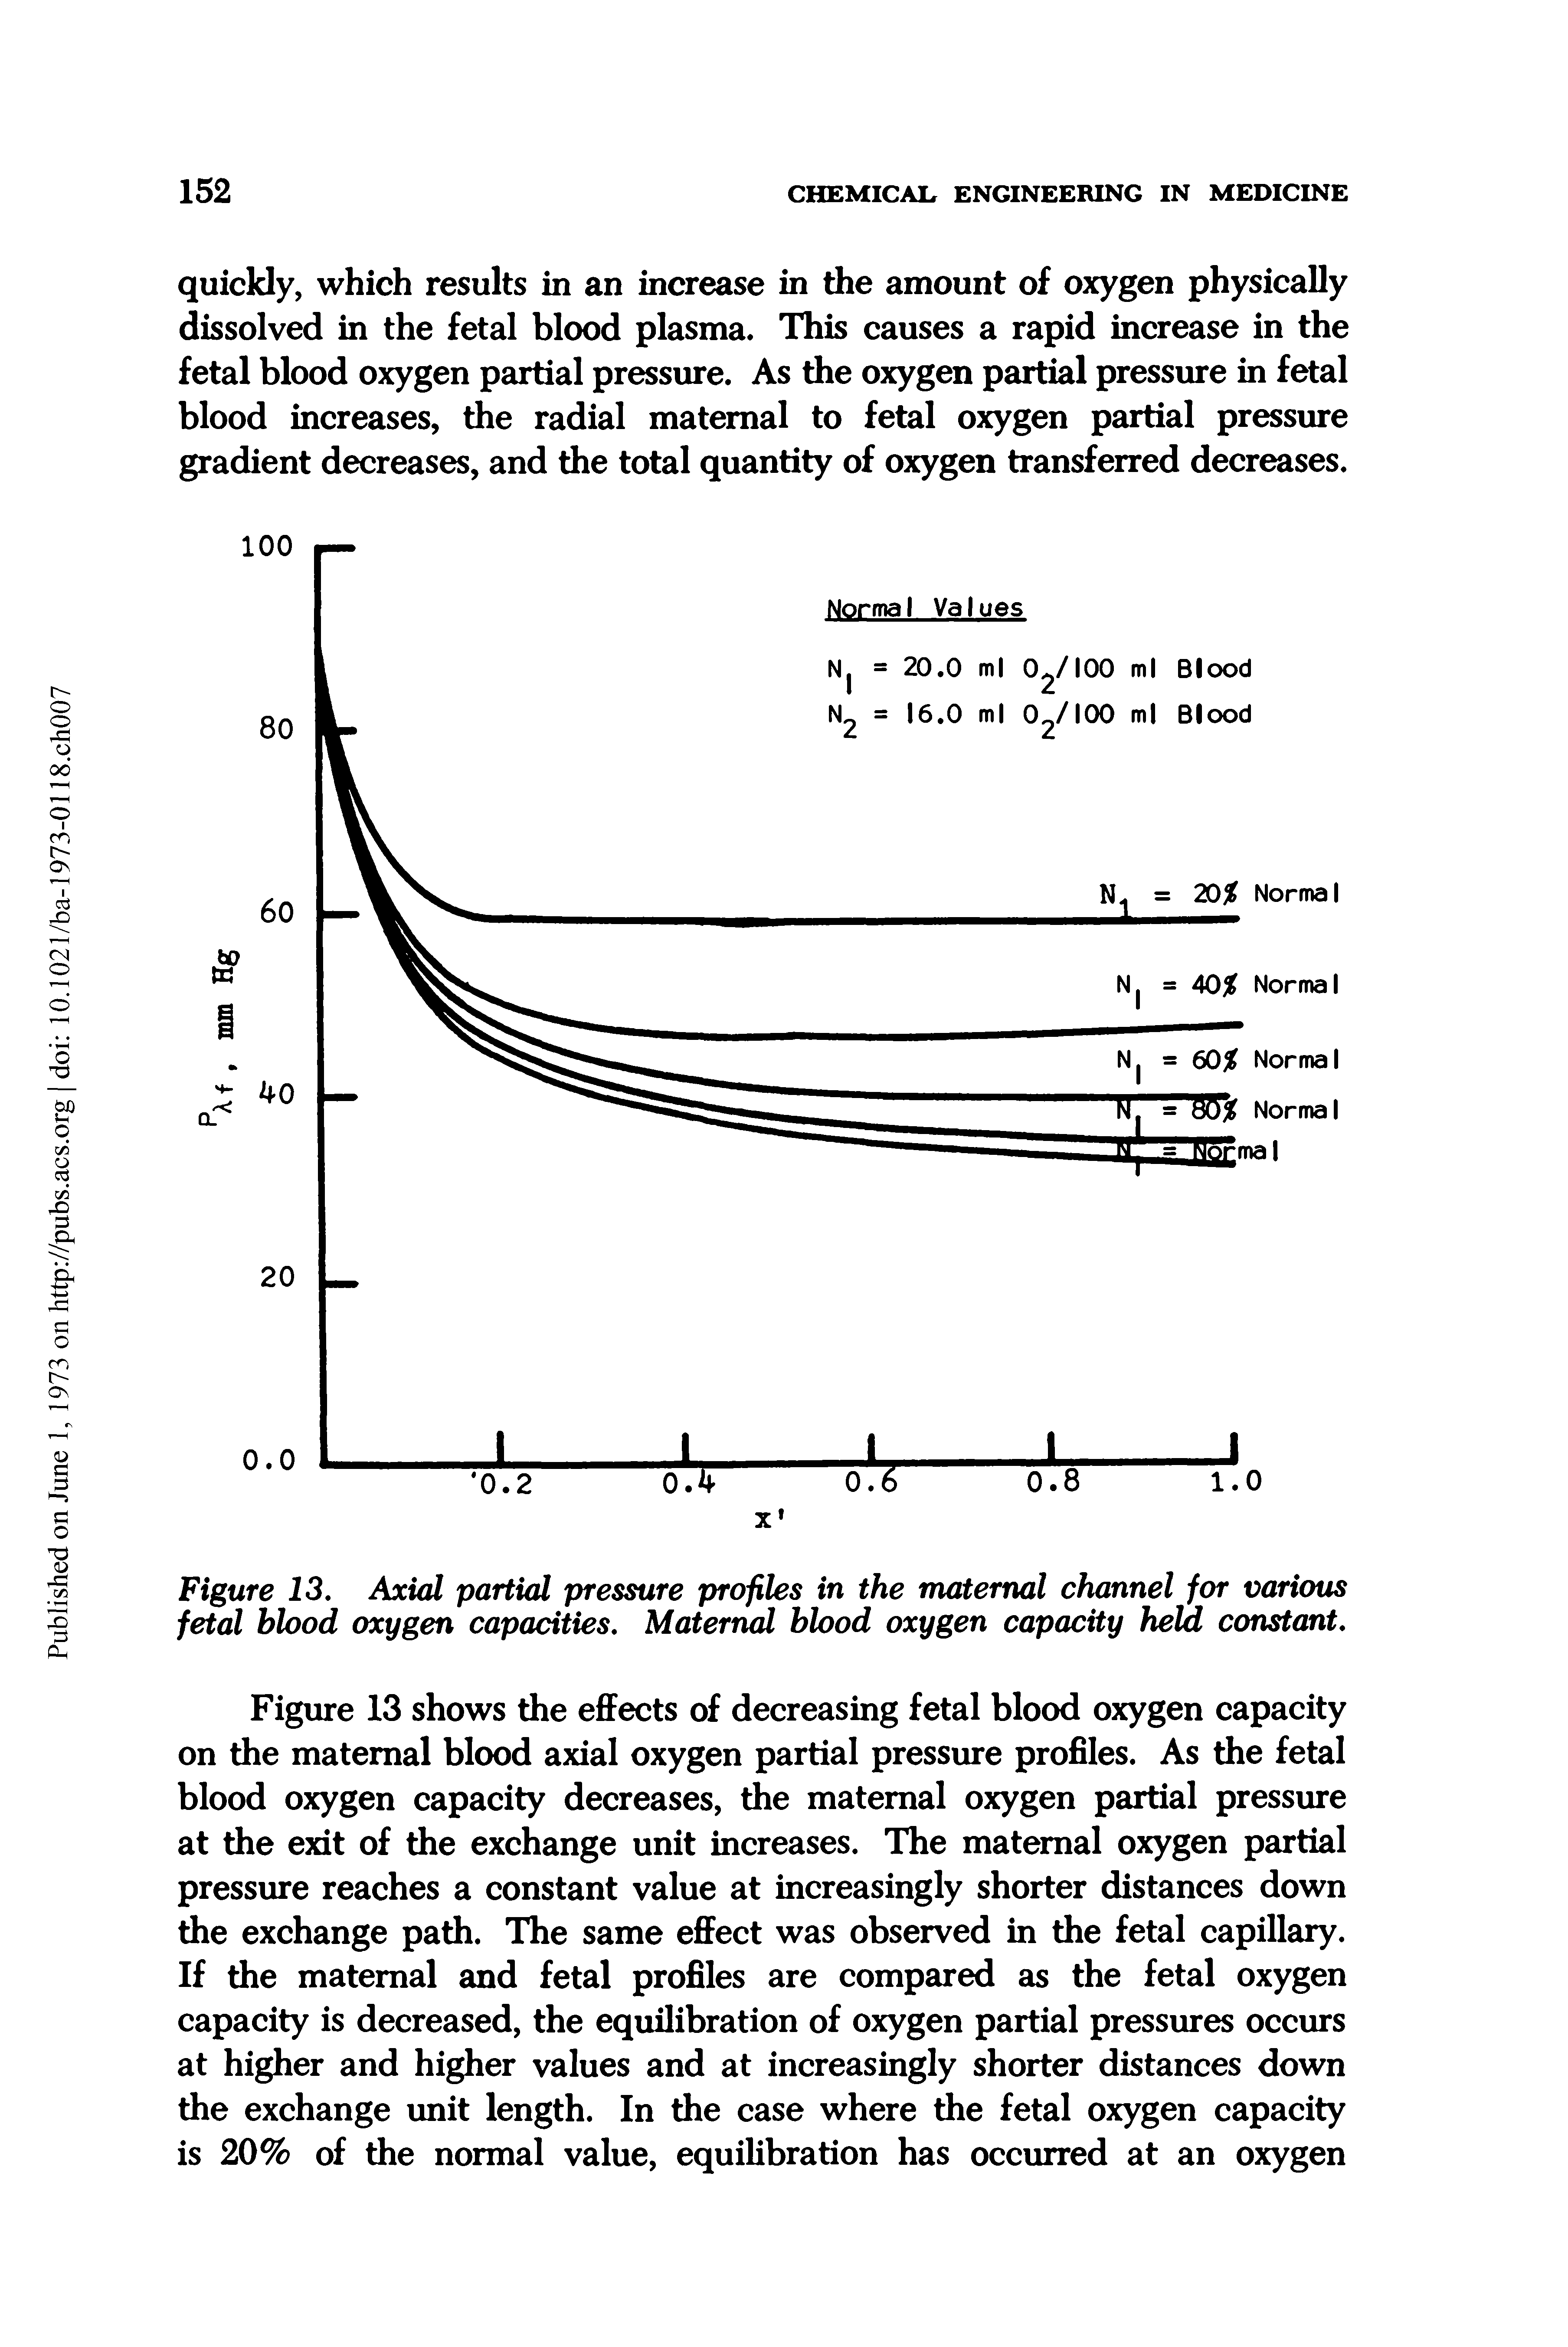 Figure 13. Axial partial pressure profiles in the maternal channel for various fetal blood oxygen capacities. Maternal blood oxygen capacity held constant.